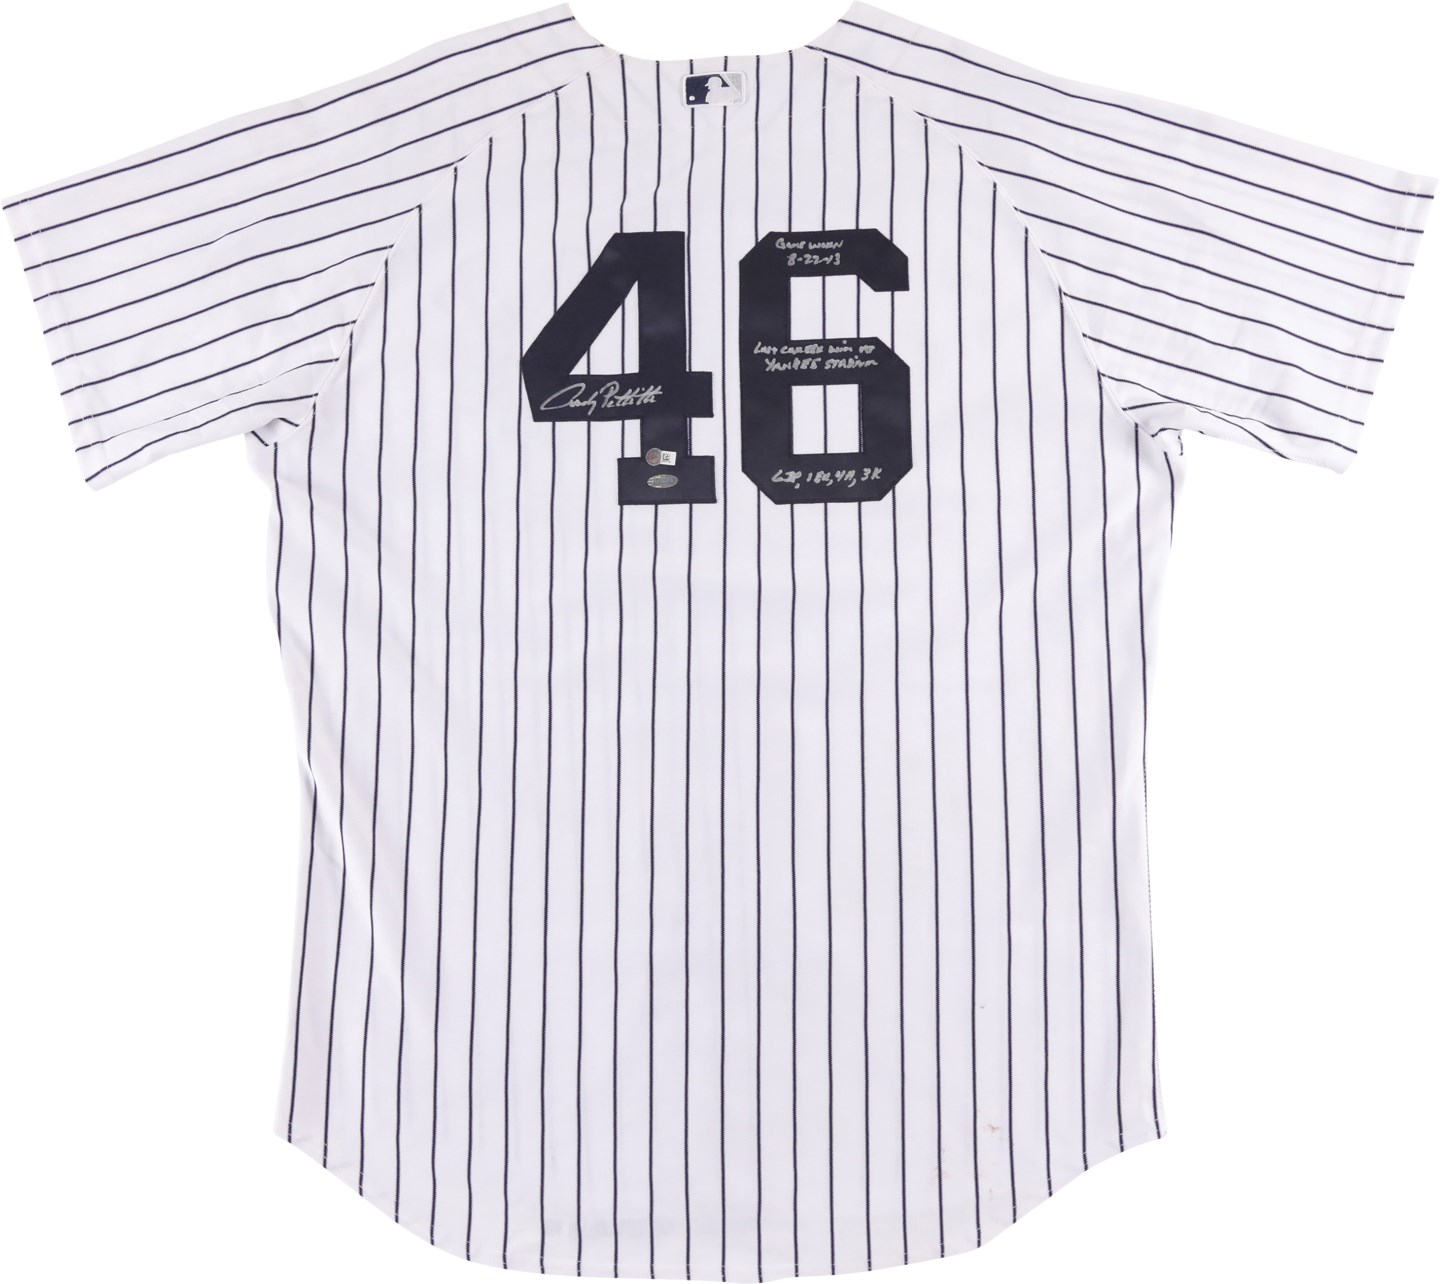 - 8/22/13 Andy Pettitte Last Career Win at Yankee Stadium Signed Heavily Inscribed Game Worn Jersey (Sports Investors Photo-Matched, MLB, & Steiner)